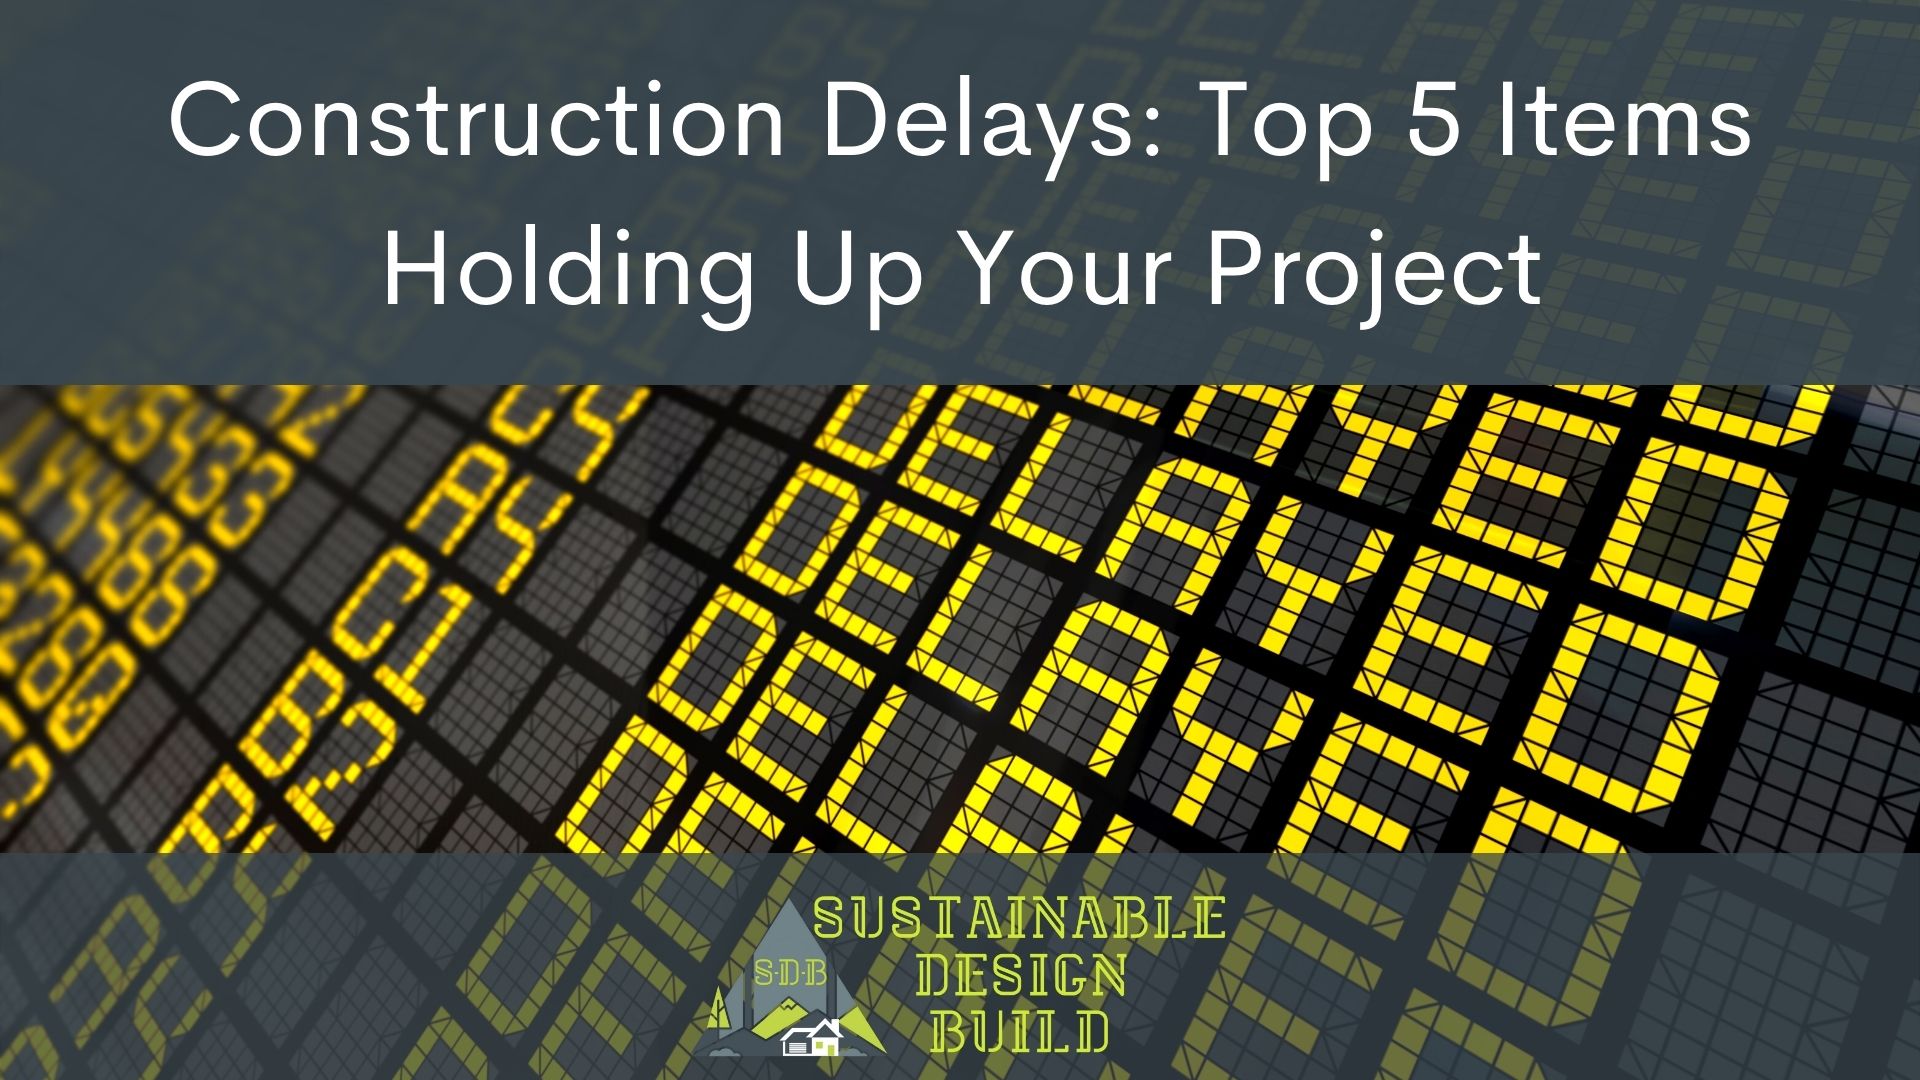 Construction Delays Top 5 Items Holding Up Your Project